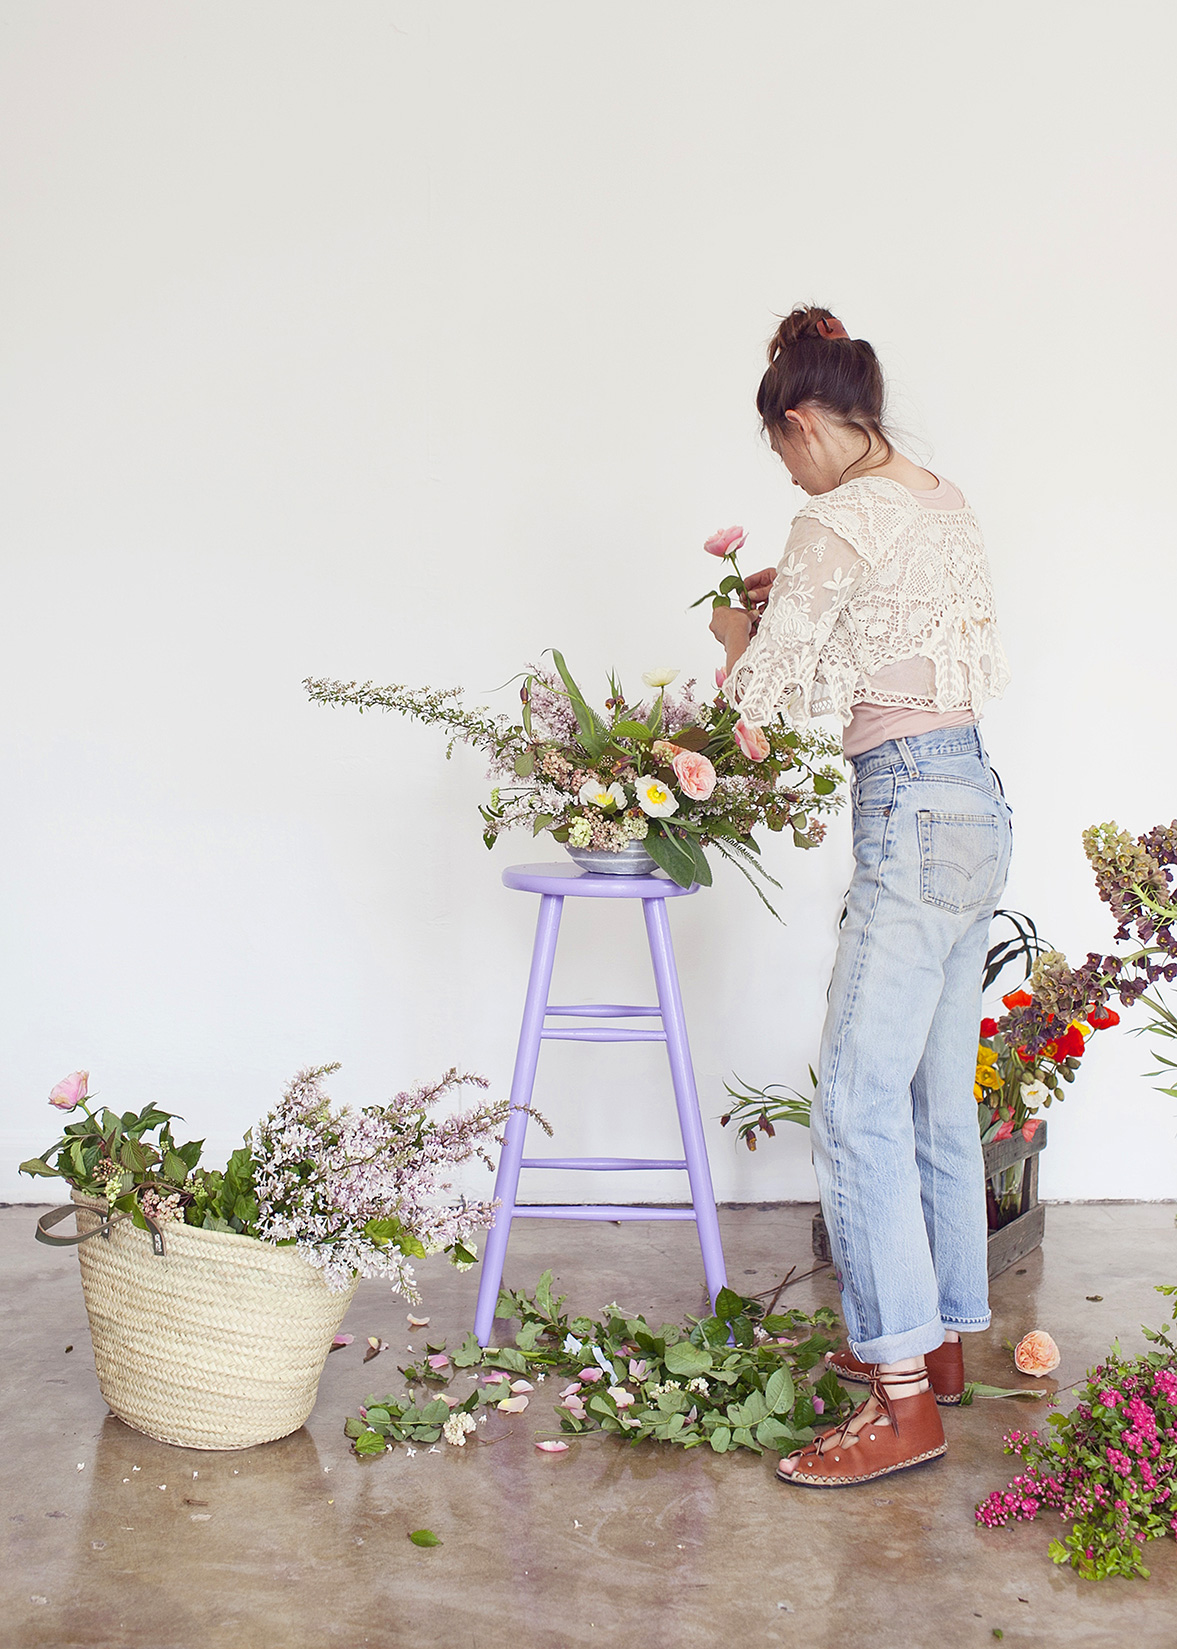 Artful lifestyle moment by Kimberly Genevieve: Woman arranging flowers in Los Angeles